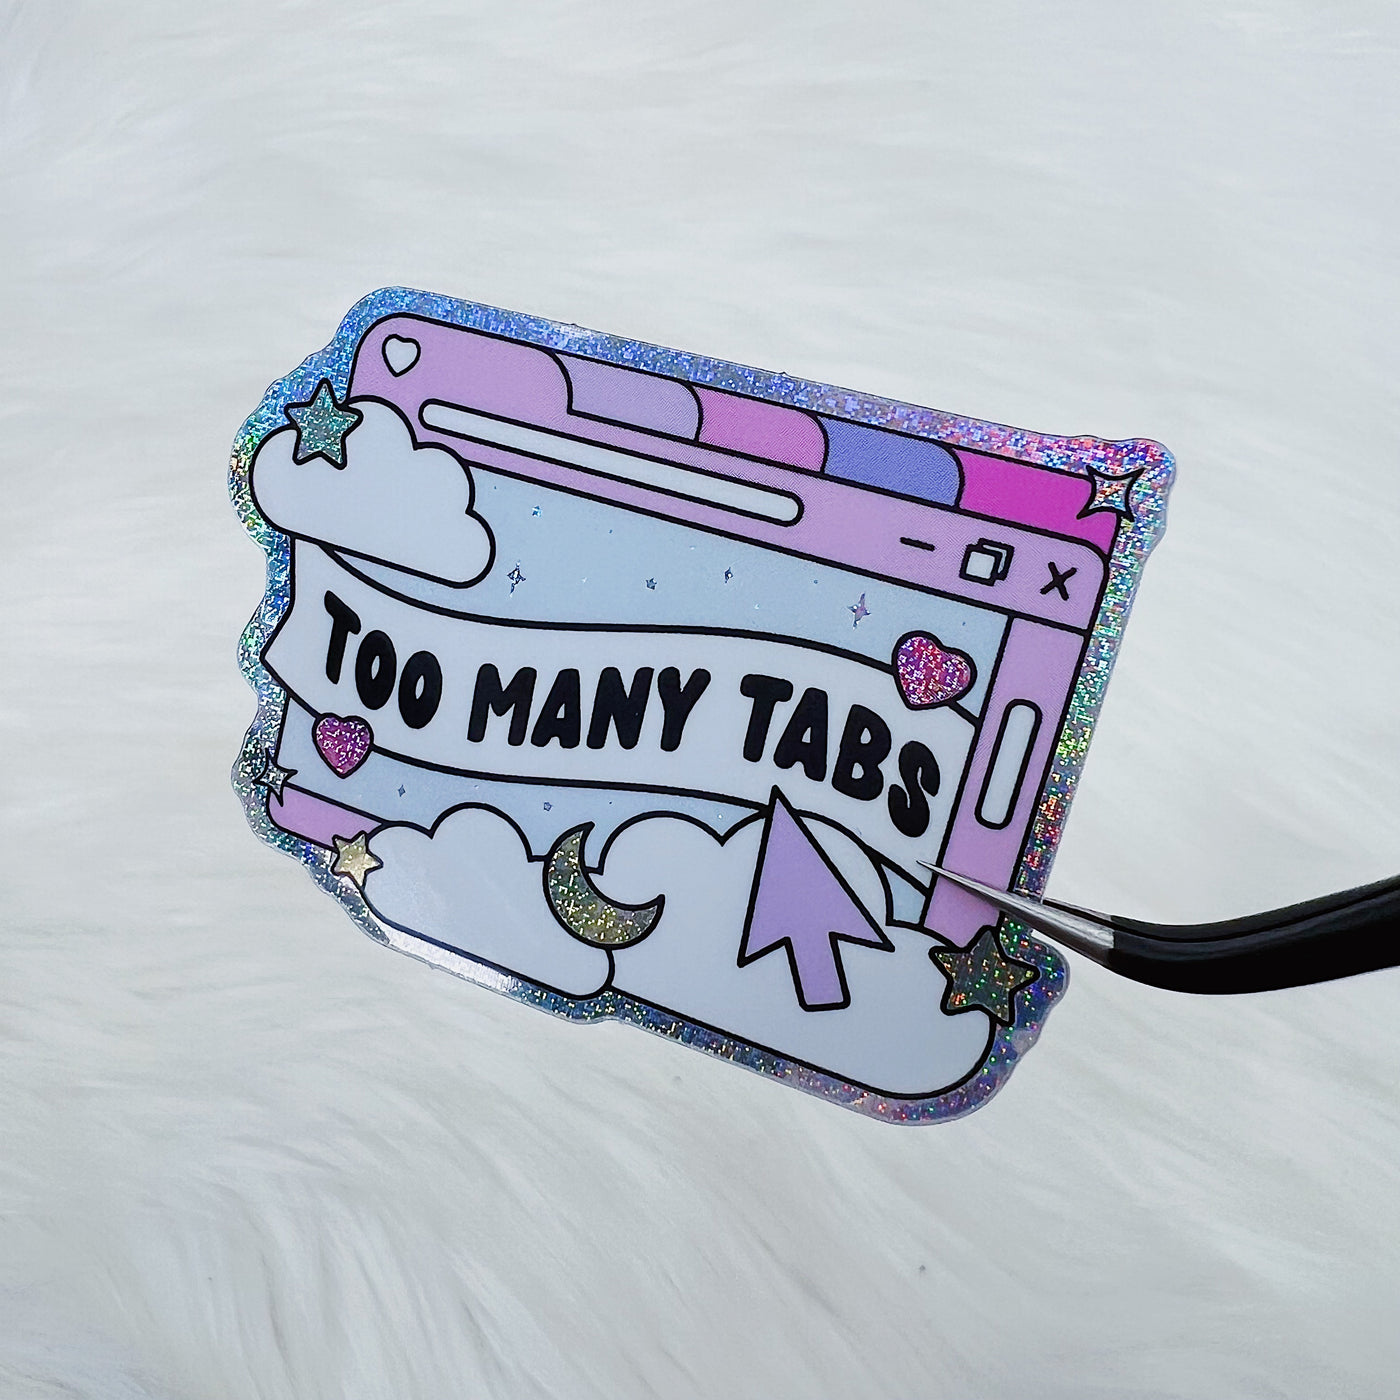 Holographic Glitter Too Many Tabs Vinyl Sticker Die Cut